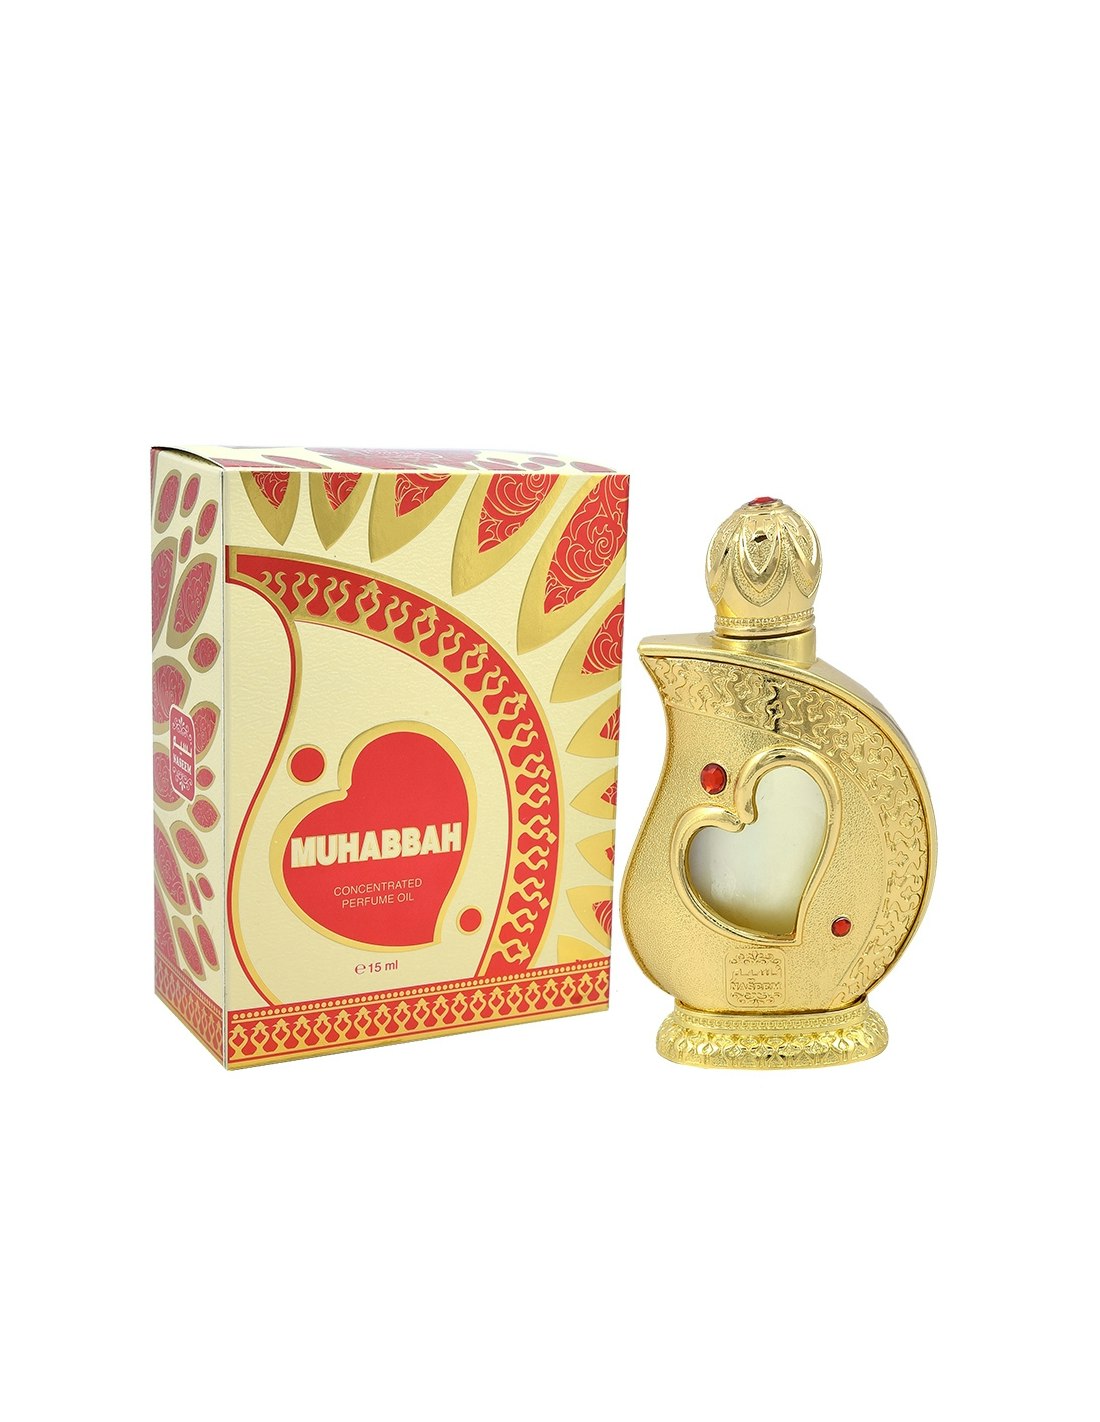 Muhabbah Concentrated Perfume Oil 15 ml